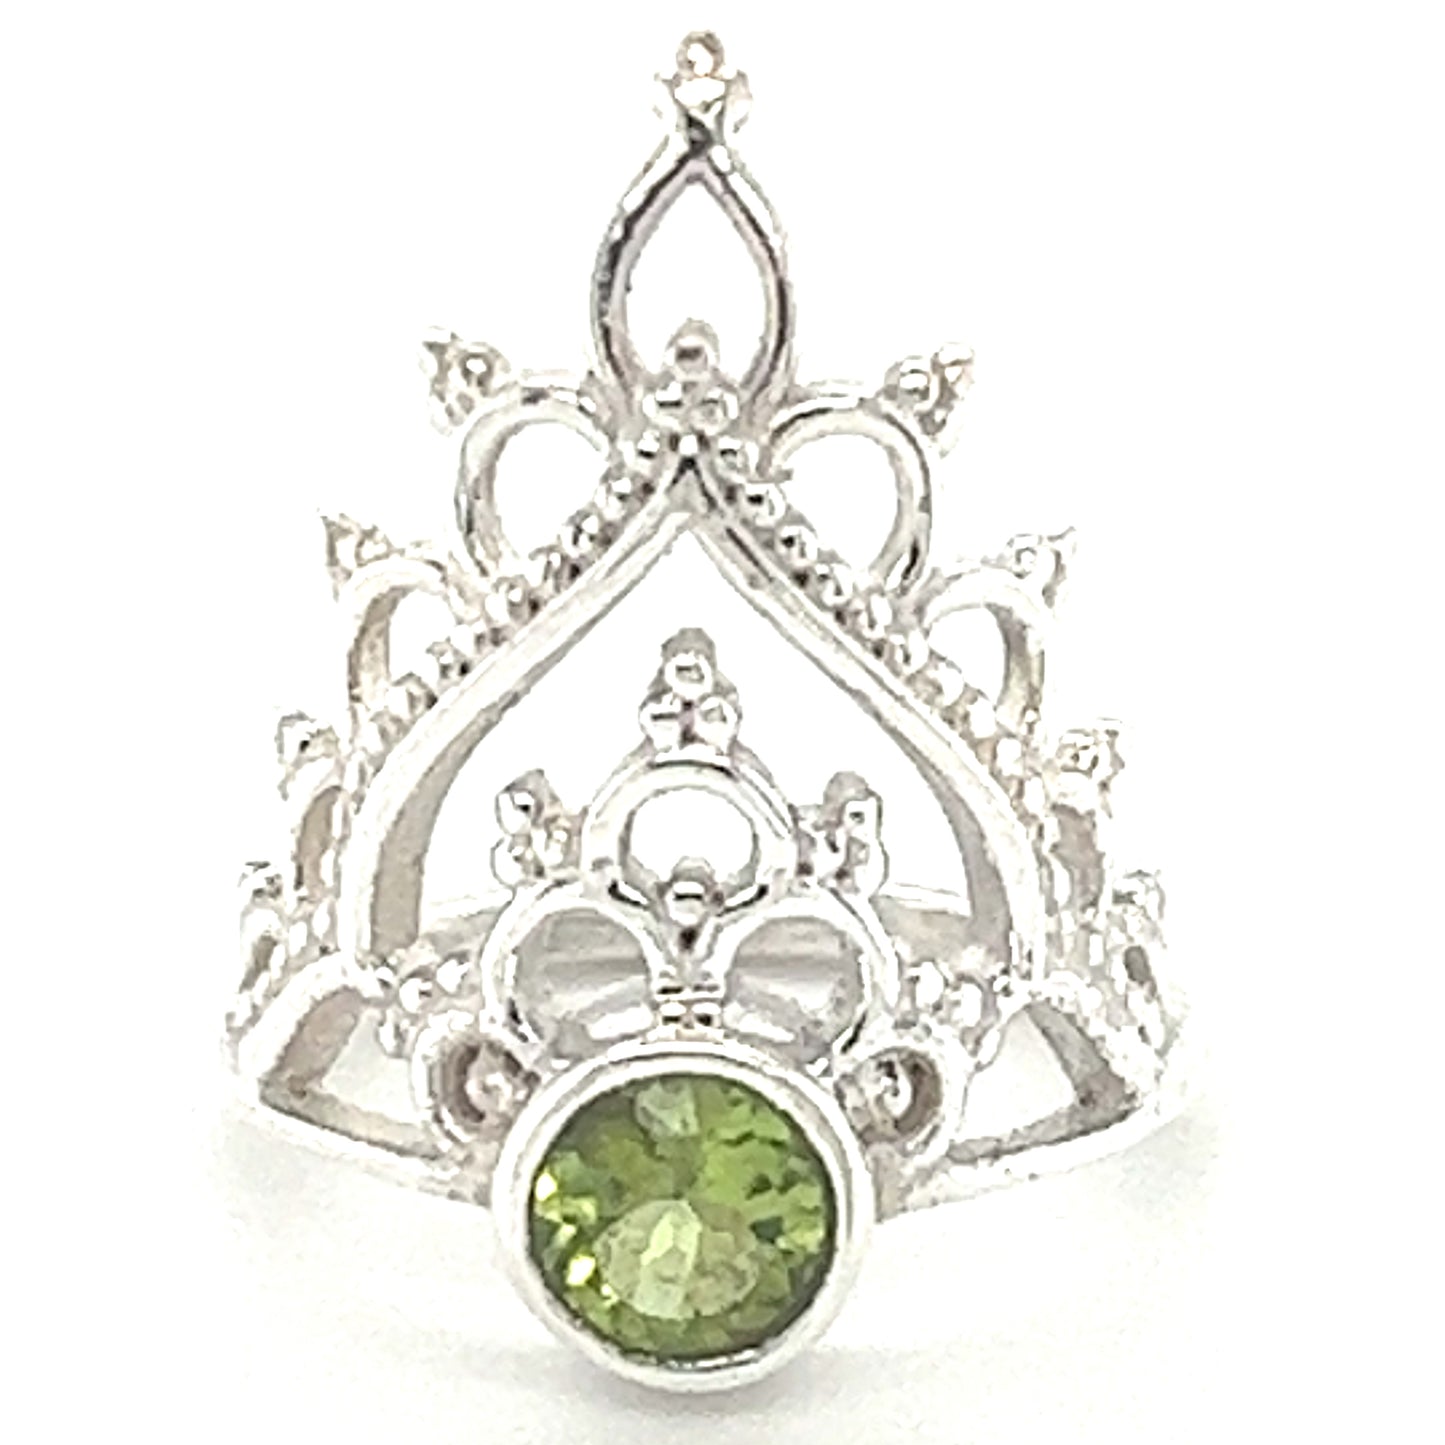 
                  
                    A silver Henna crown ring adorned with a stunning peridot gemstone in the center, from Super Silver.
                  
                